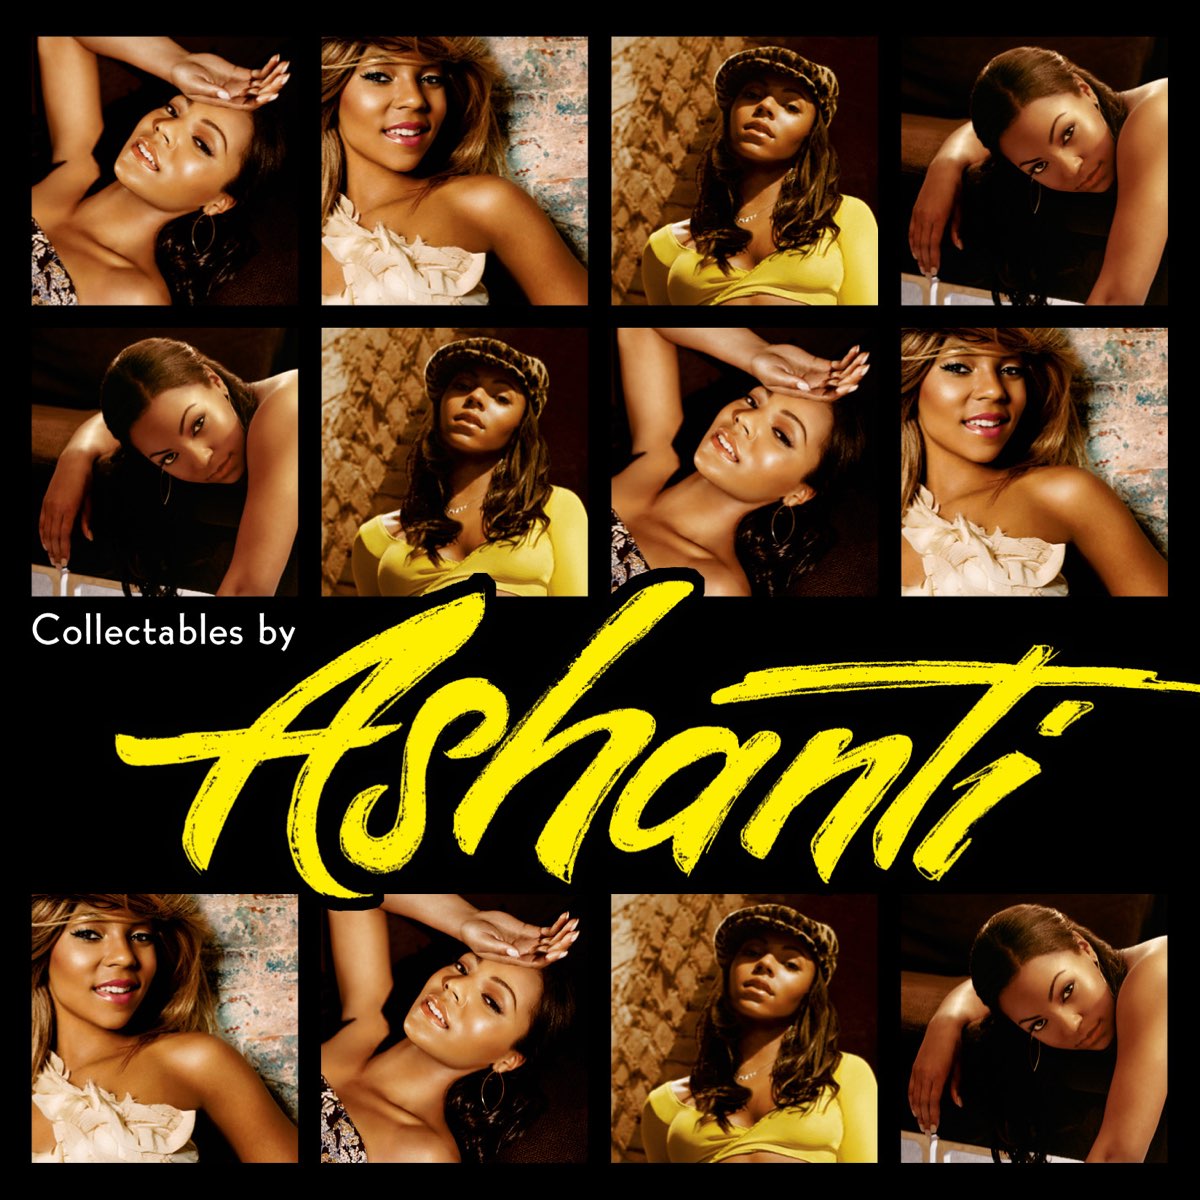 Collectables by Ashanti by Ashanti.